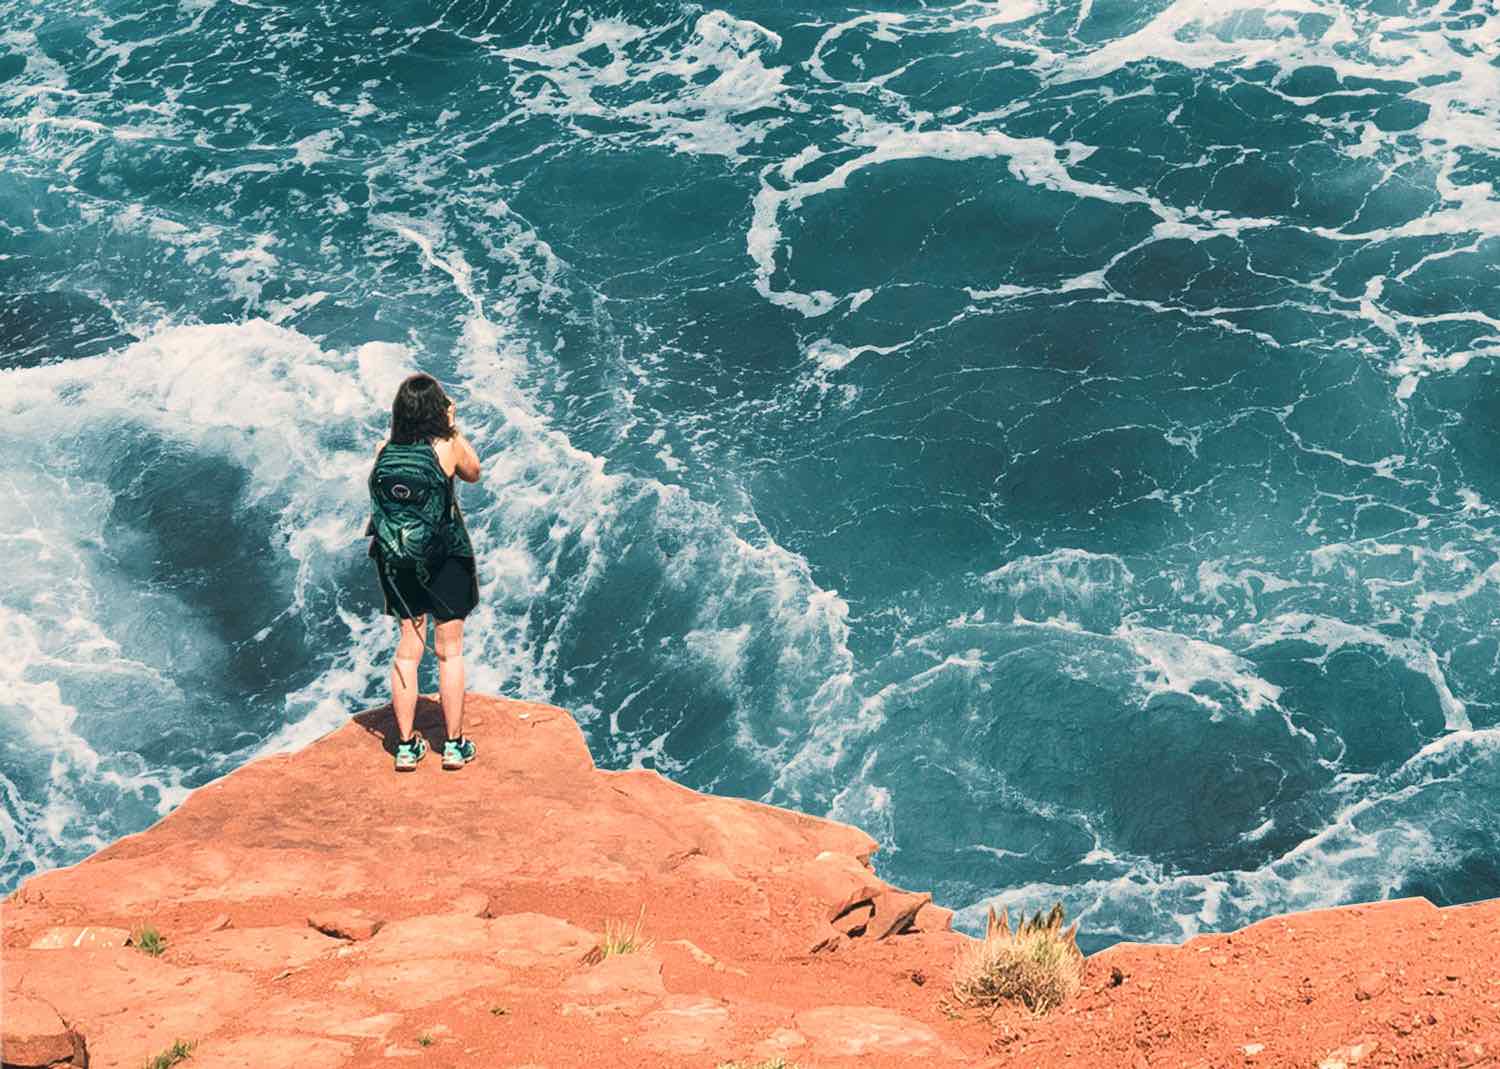 Collaged photos of a person standing on a cliff taking a photo of the water below